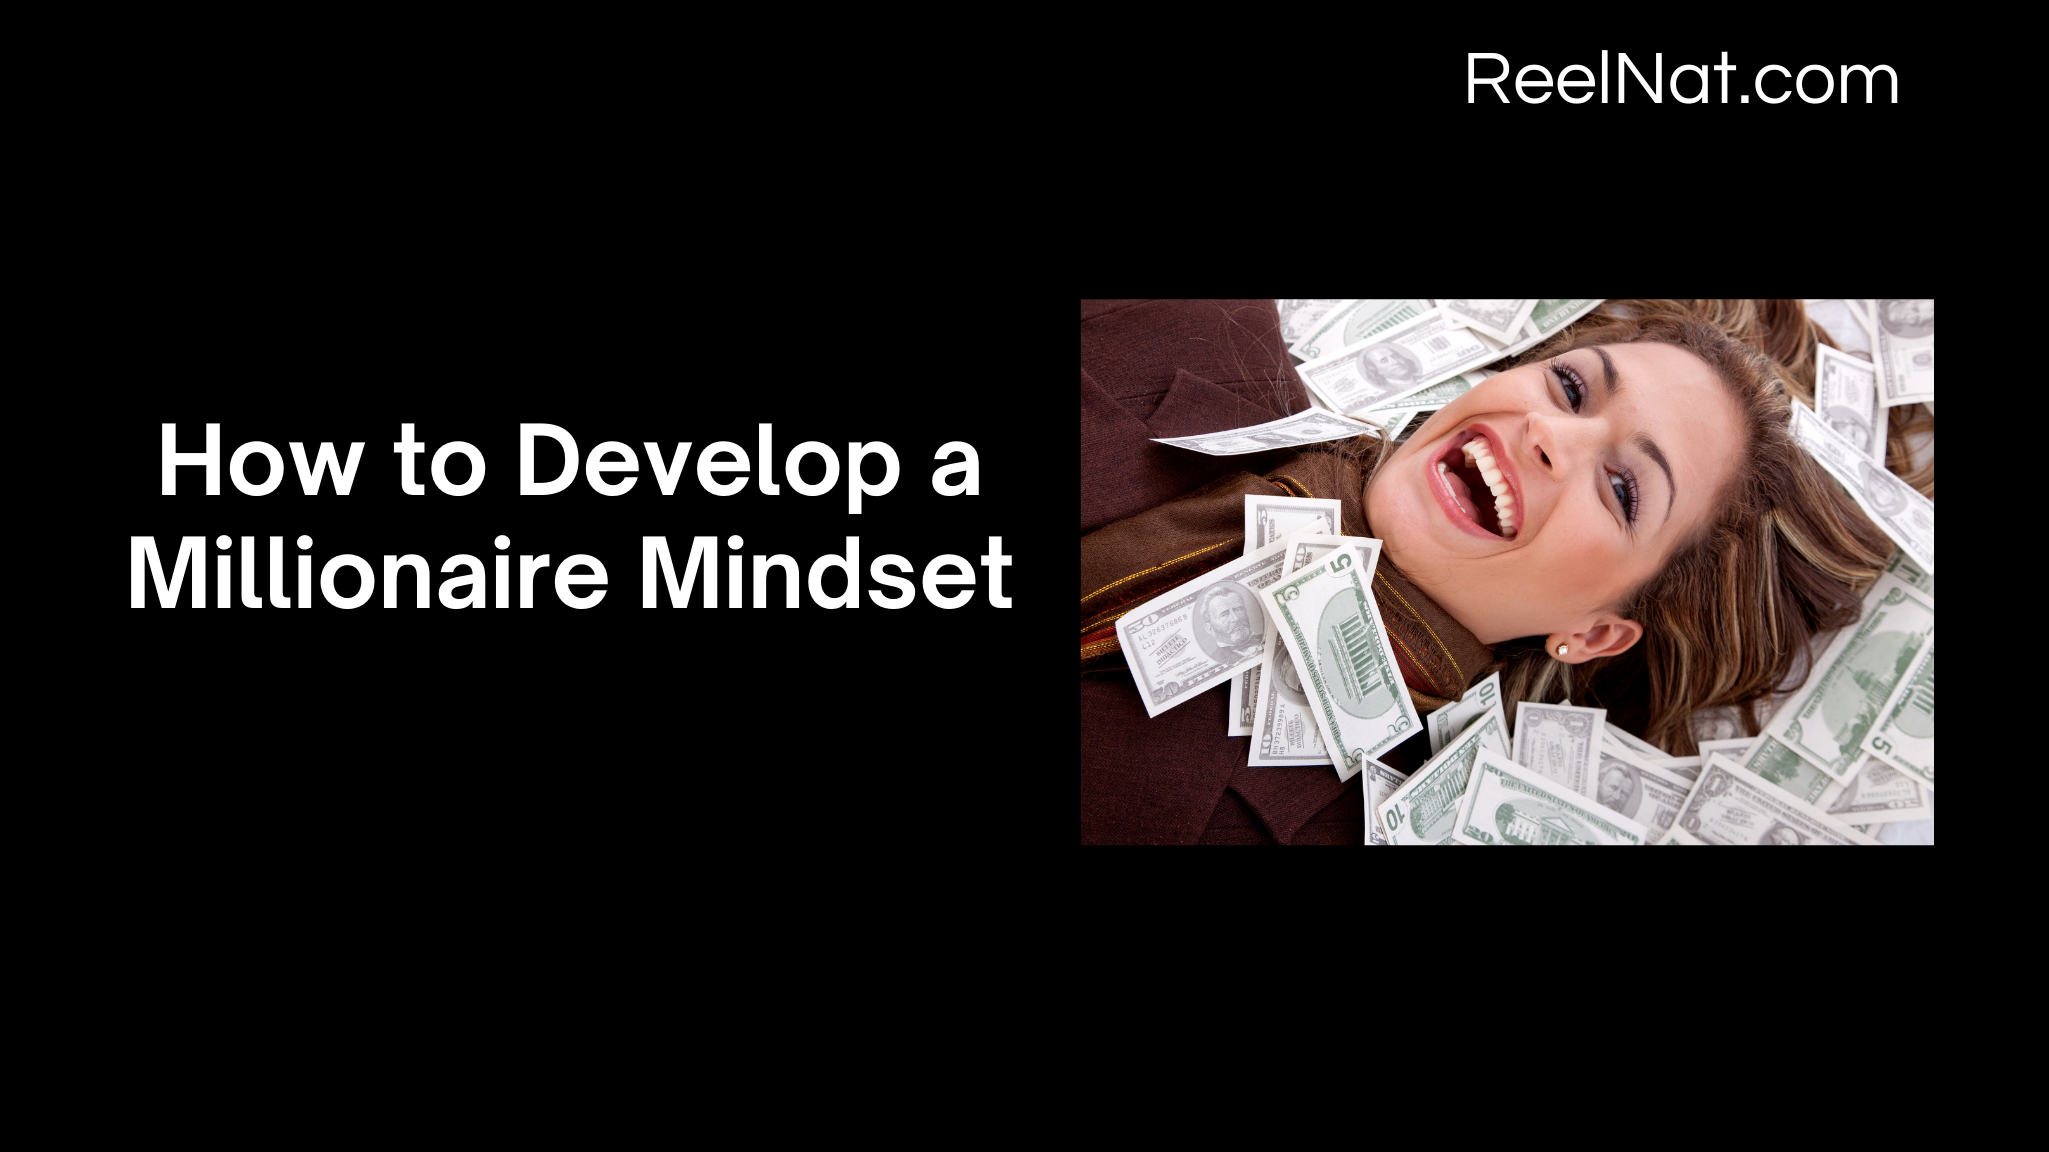 [New Update] How to Develop a Millionaire Mindset